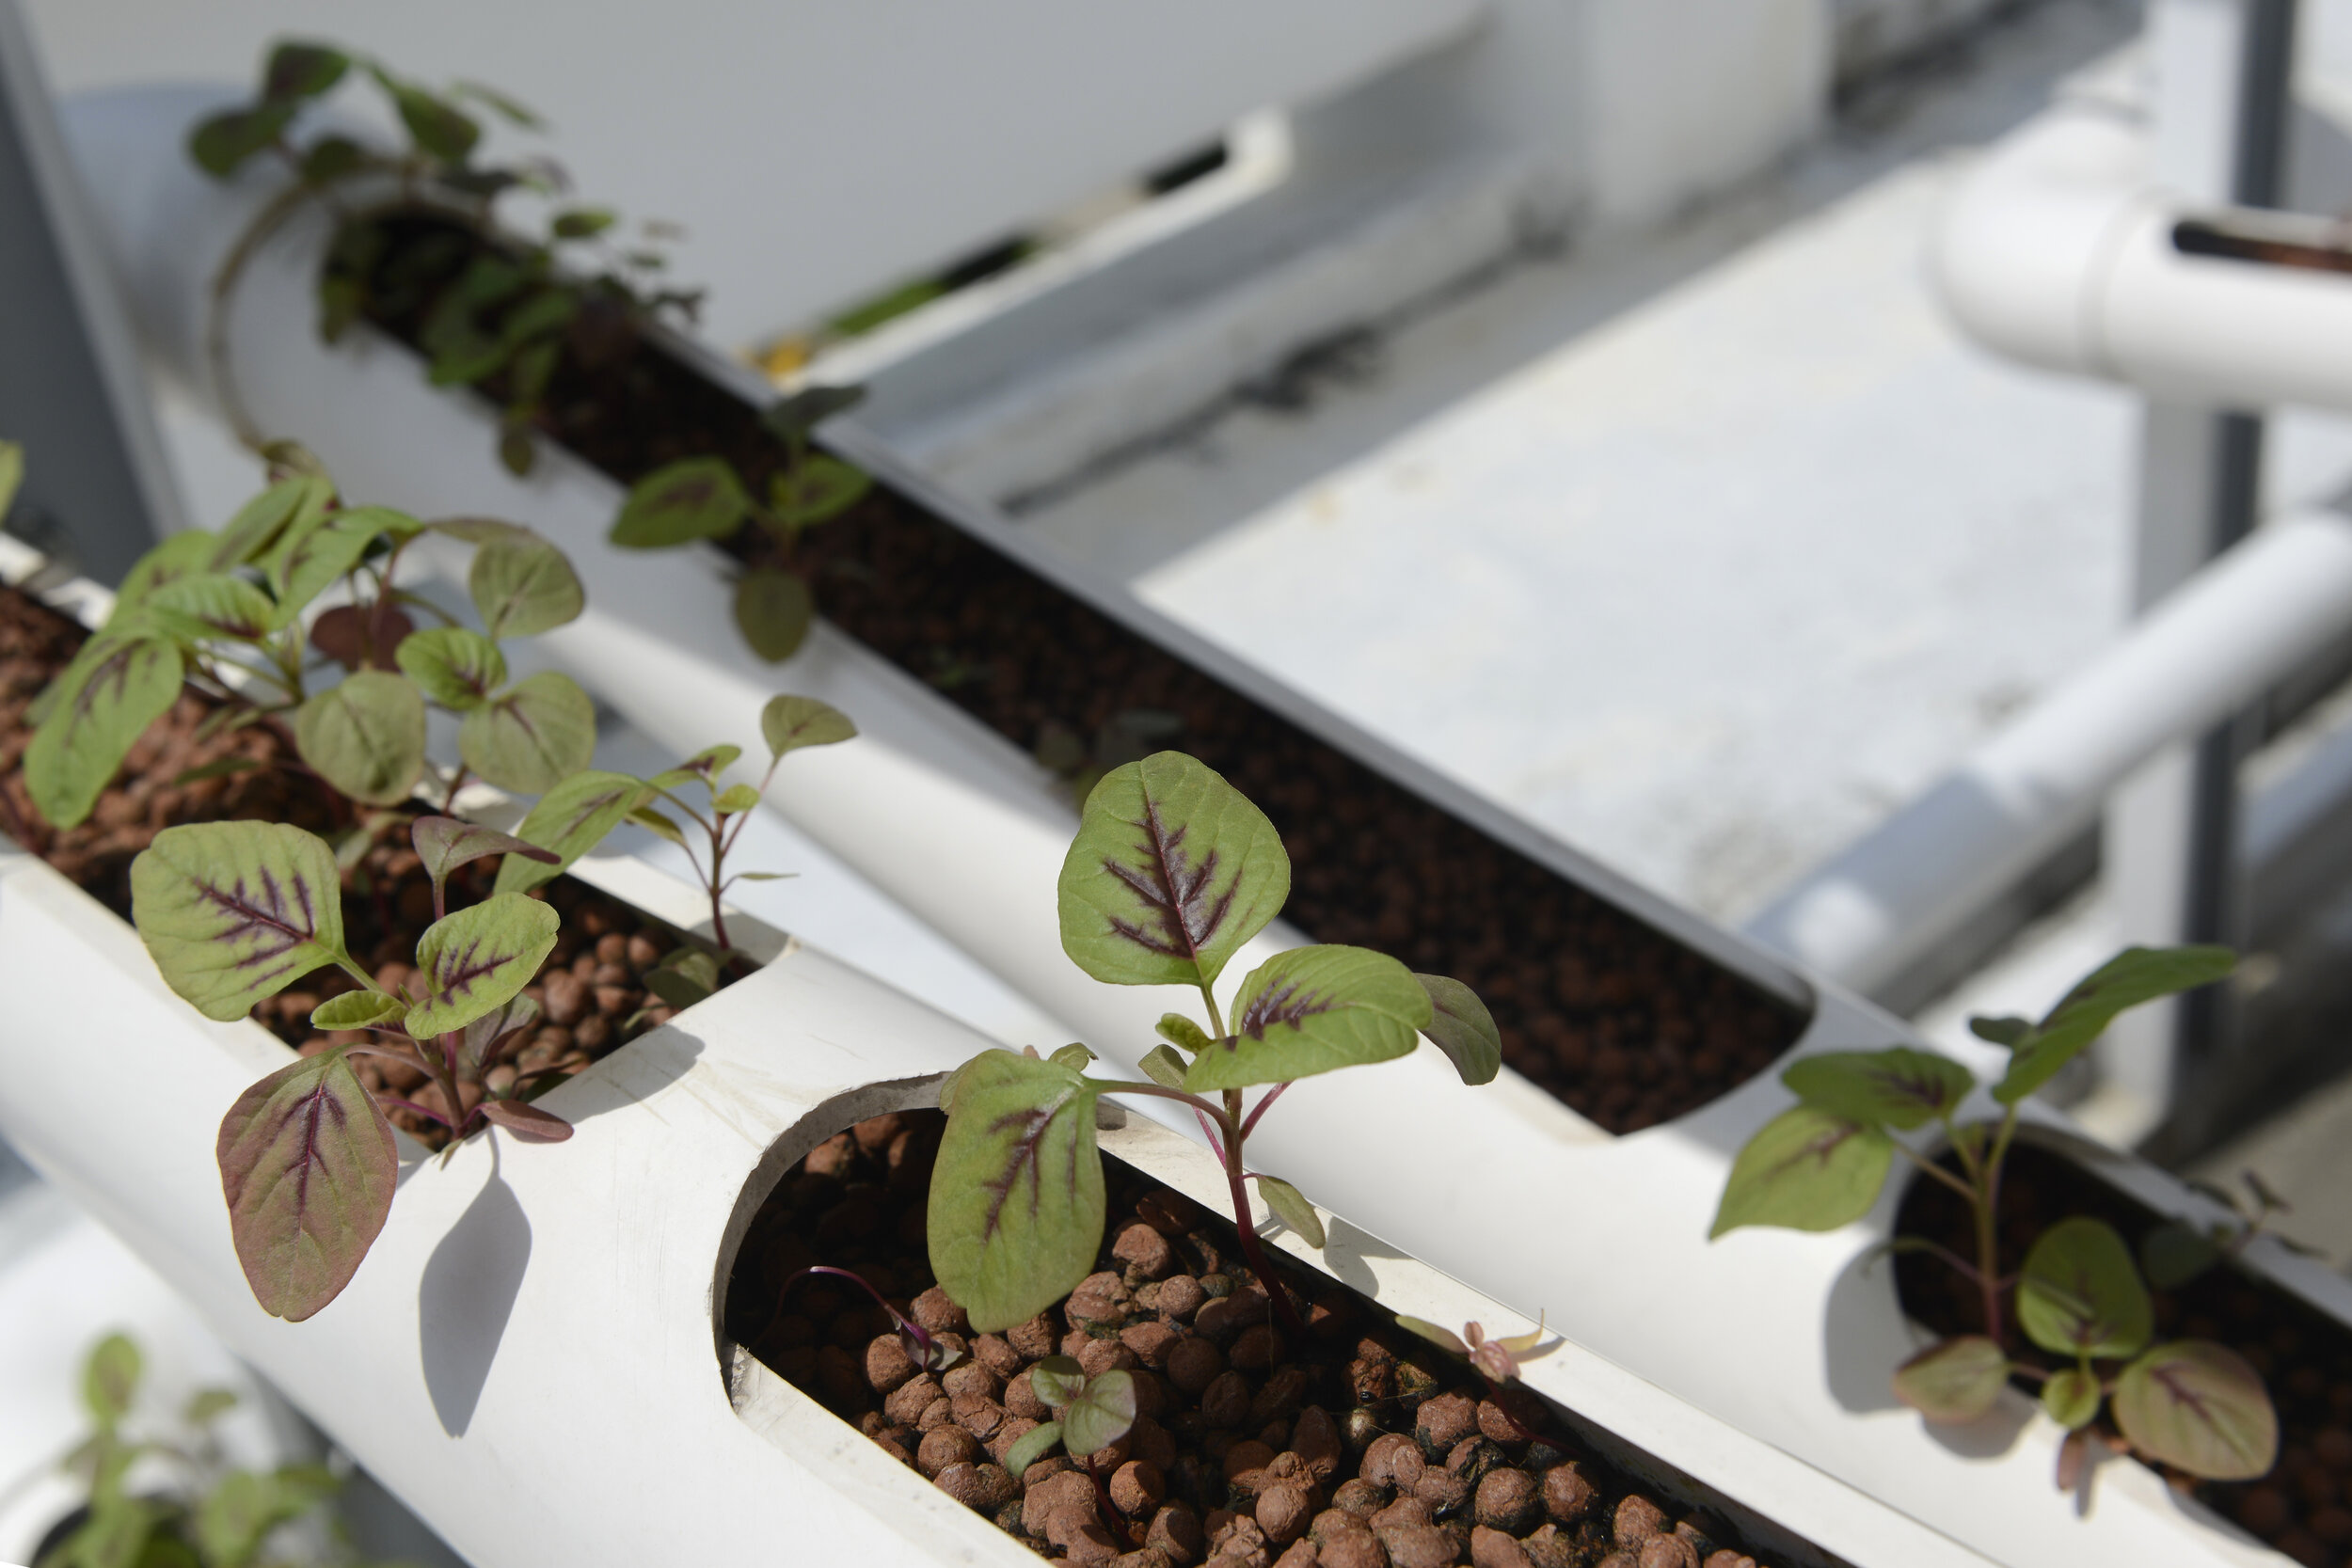  Organic red spinach seedlings sprout from growing towers that are primarily made out of polyvinyl chloride (PVC) pipes at Citiponics' urban farm on the rooftop of a multi-storey carpark in a public housing estate in western Singapore 